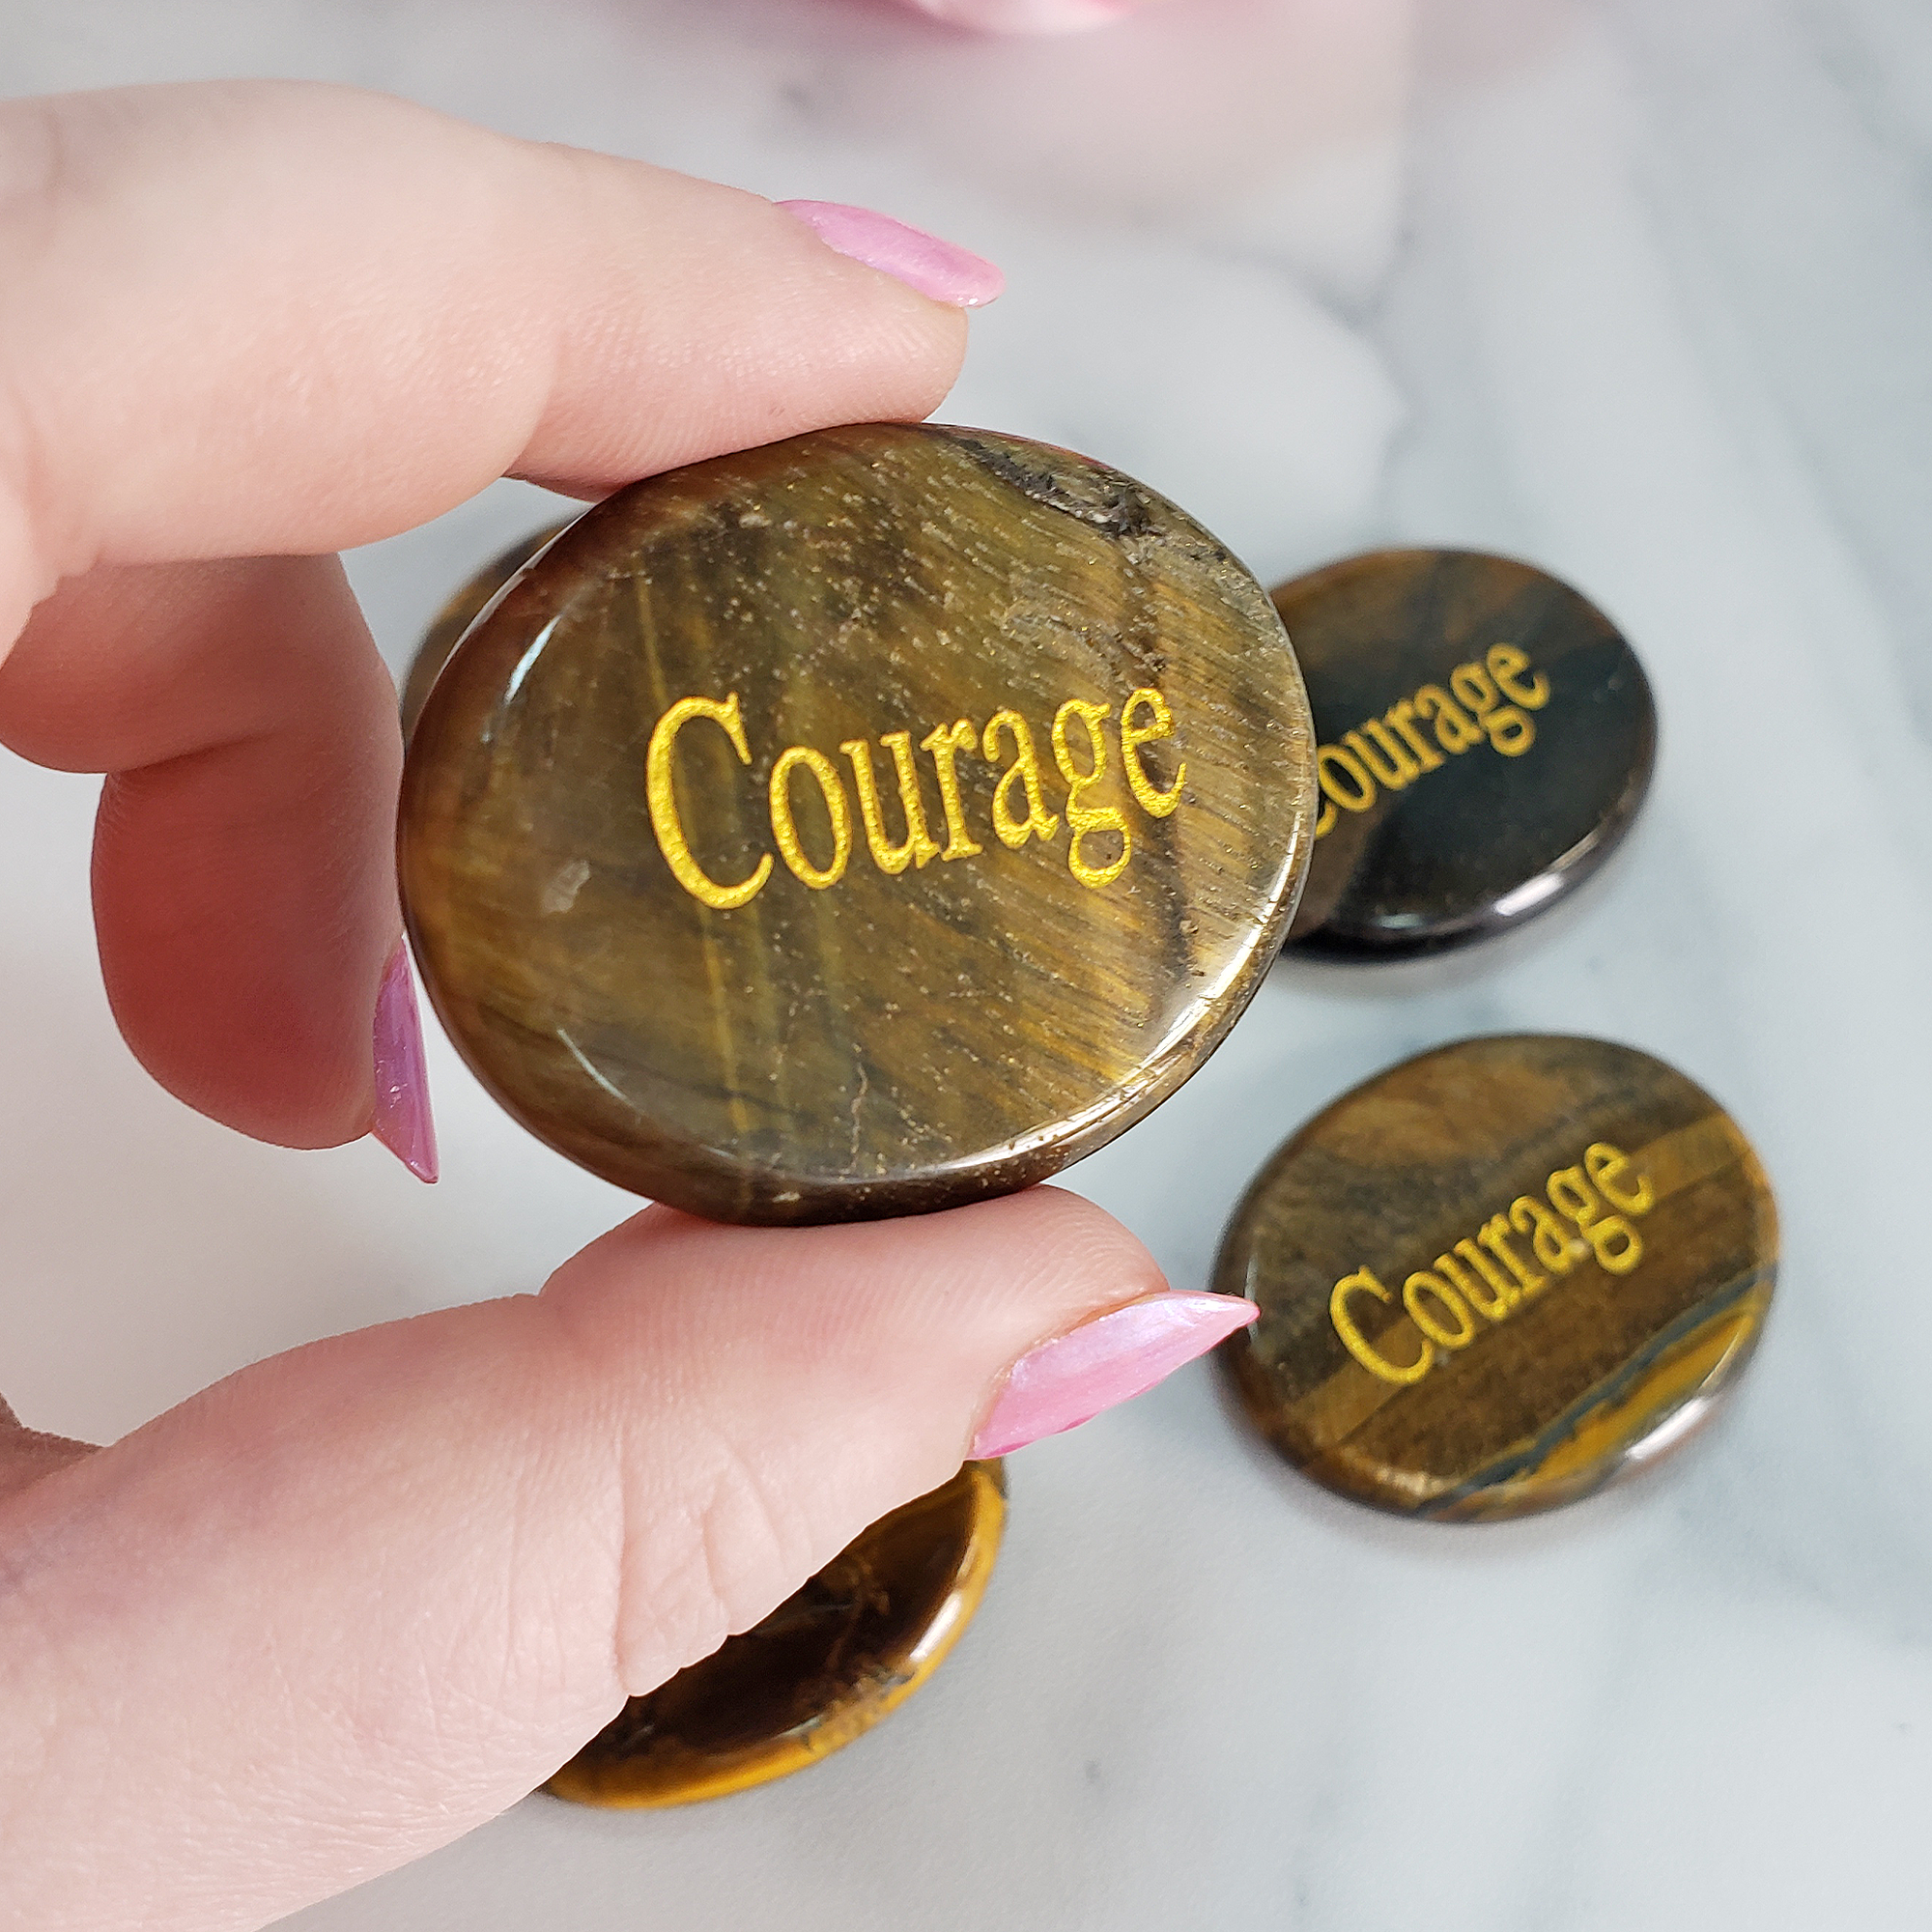 Tigers Eye Courage Affirmation Palm Stone | Natural Crystal Worry Stone with "Courage" Engraving - Close Up 2